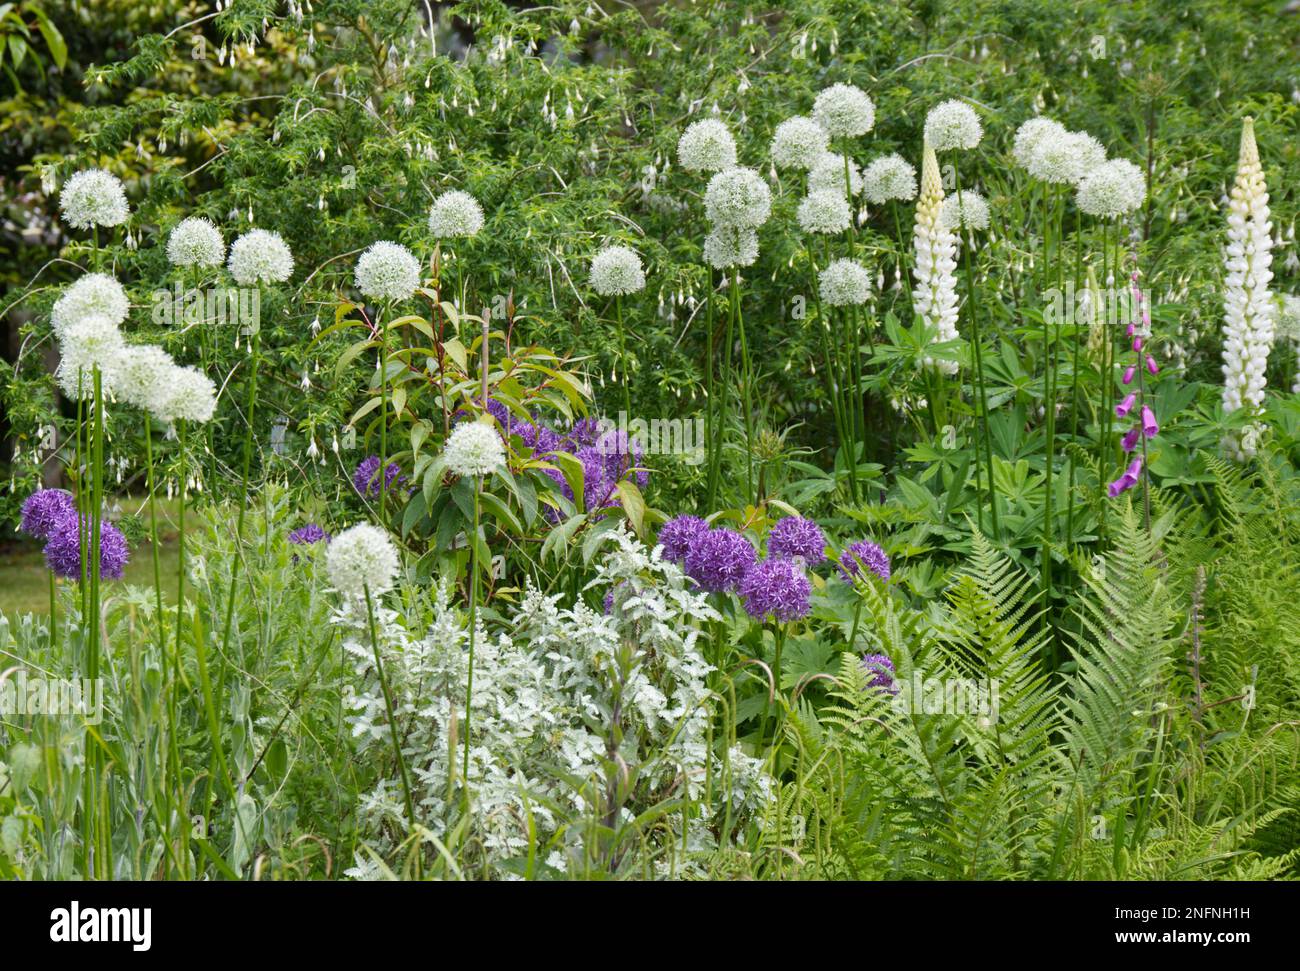 Tranquil early summer garden scene in green white and purple with alliums, fuchsia and ferns Stock Photo